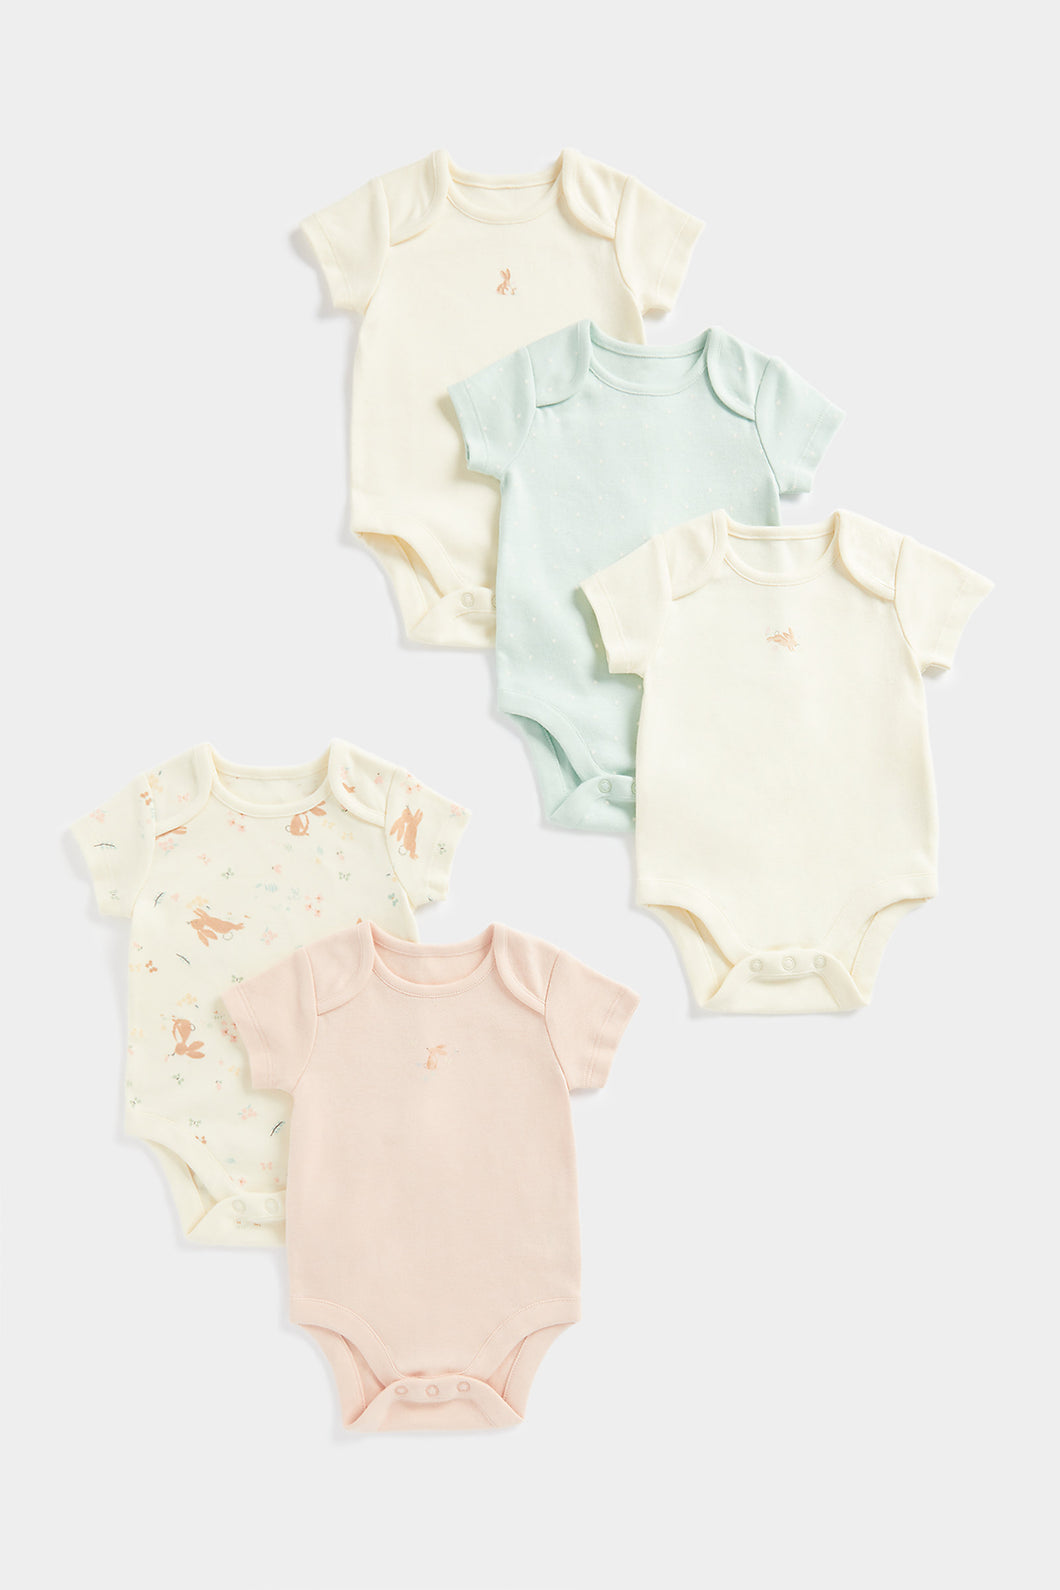 Mothercare Bunny Short-Sleeved Bodysuits - 5 Pack